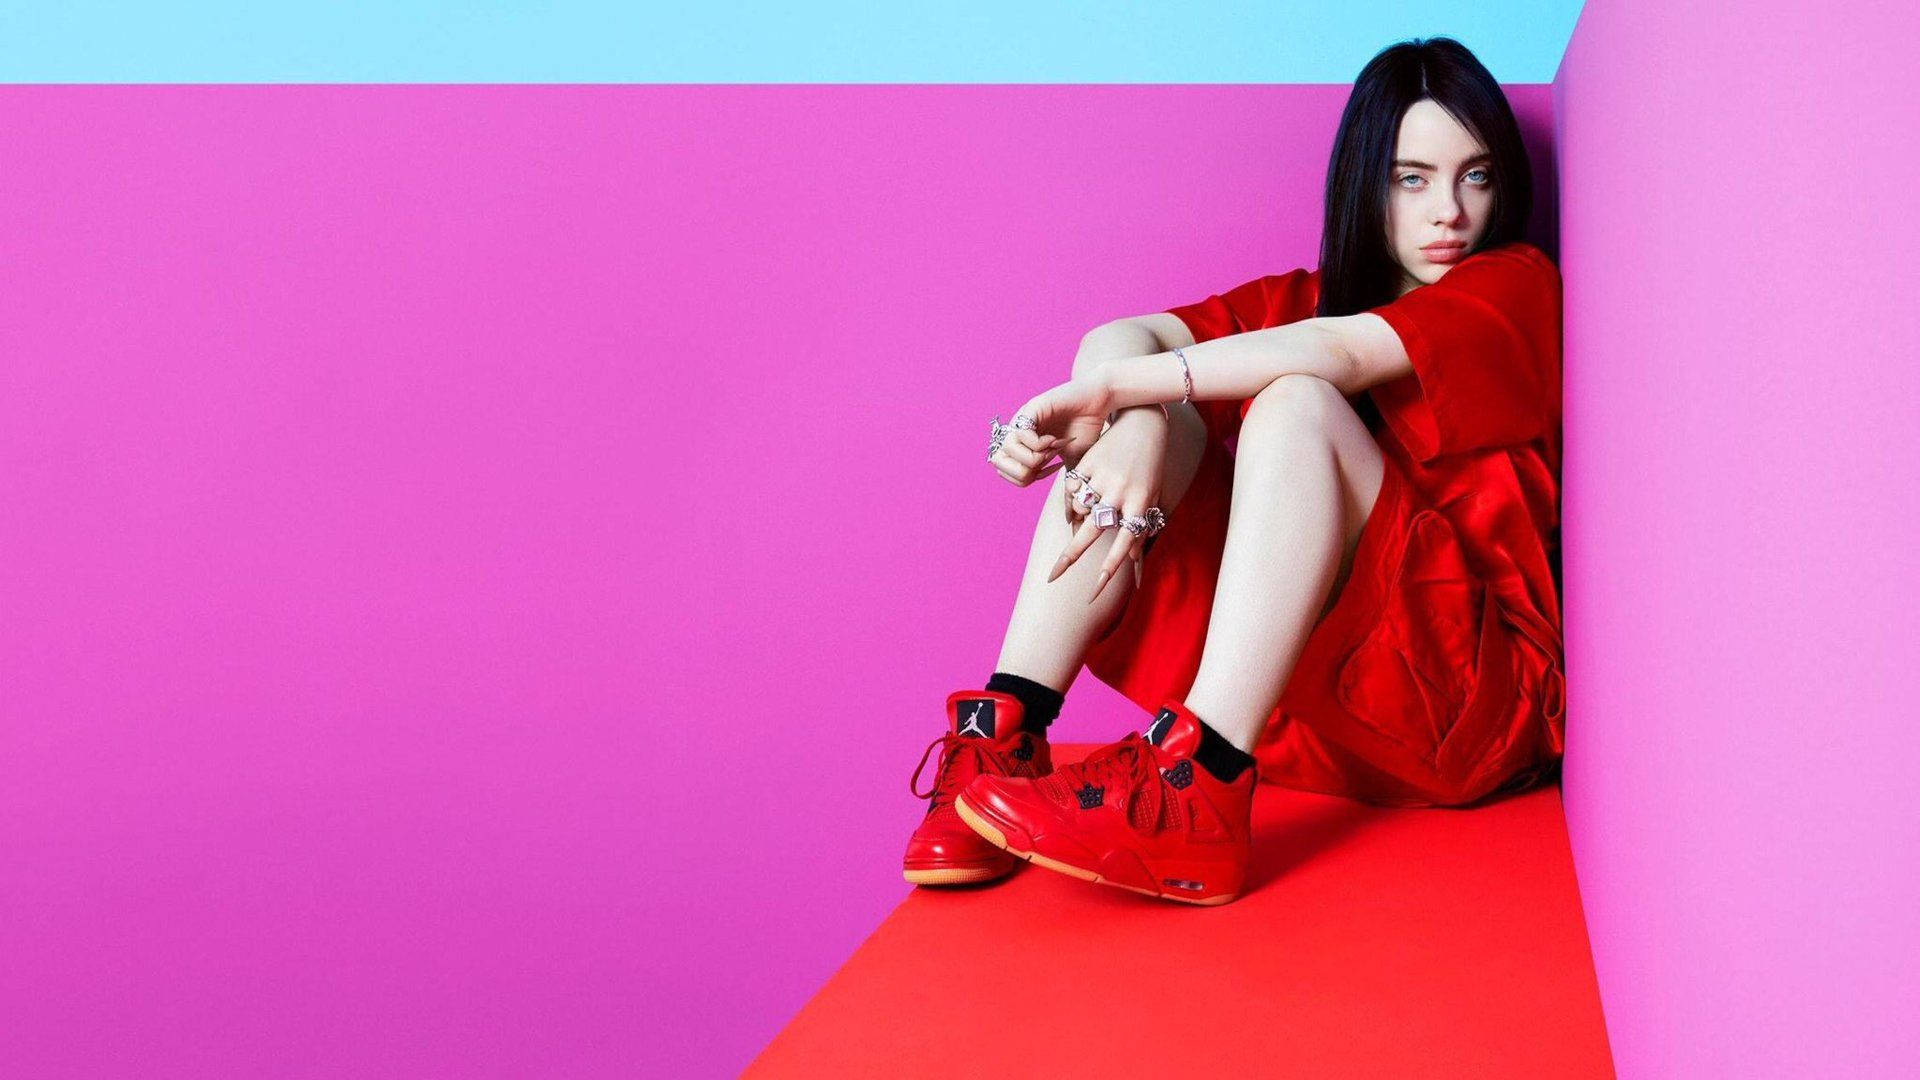 Aesthetic Billie Eilish Pink And Red Wallpaper